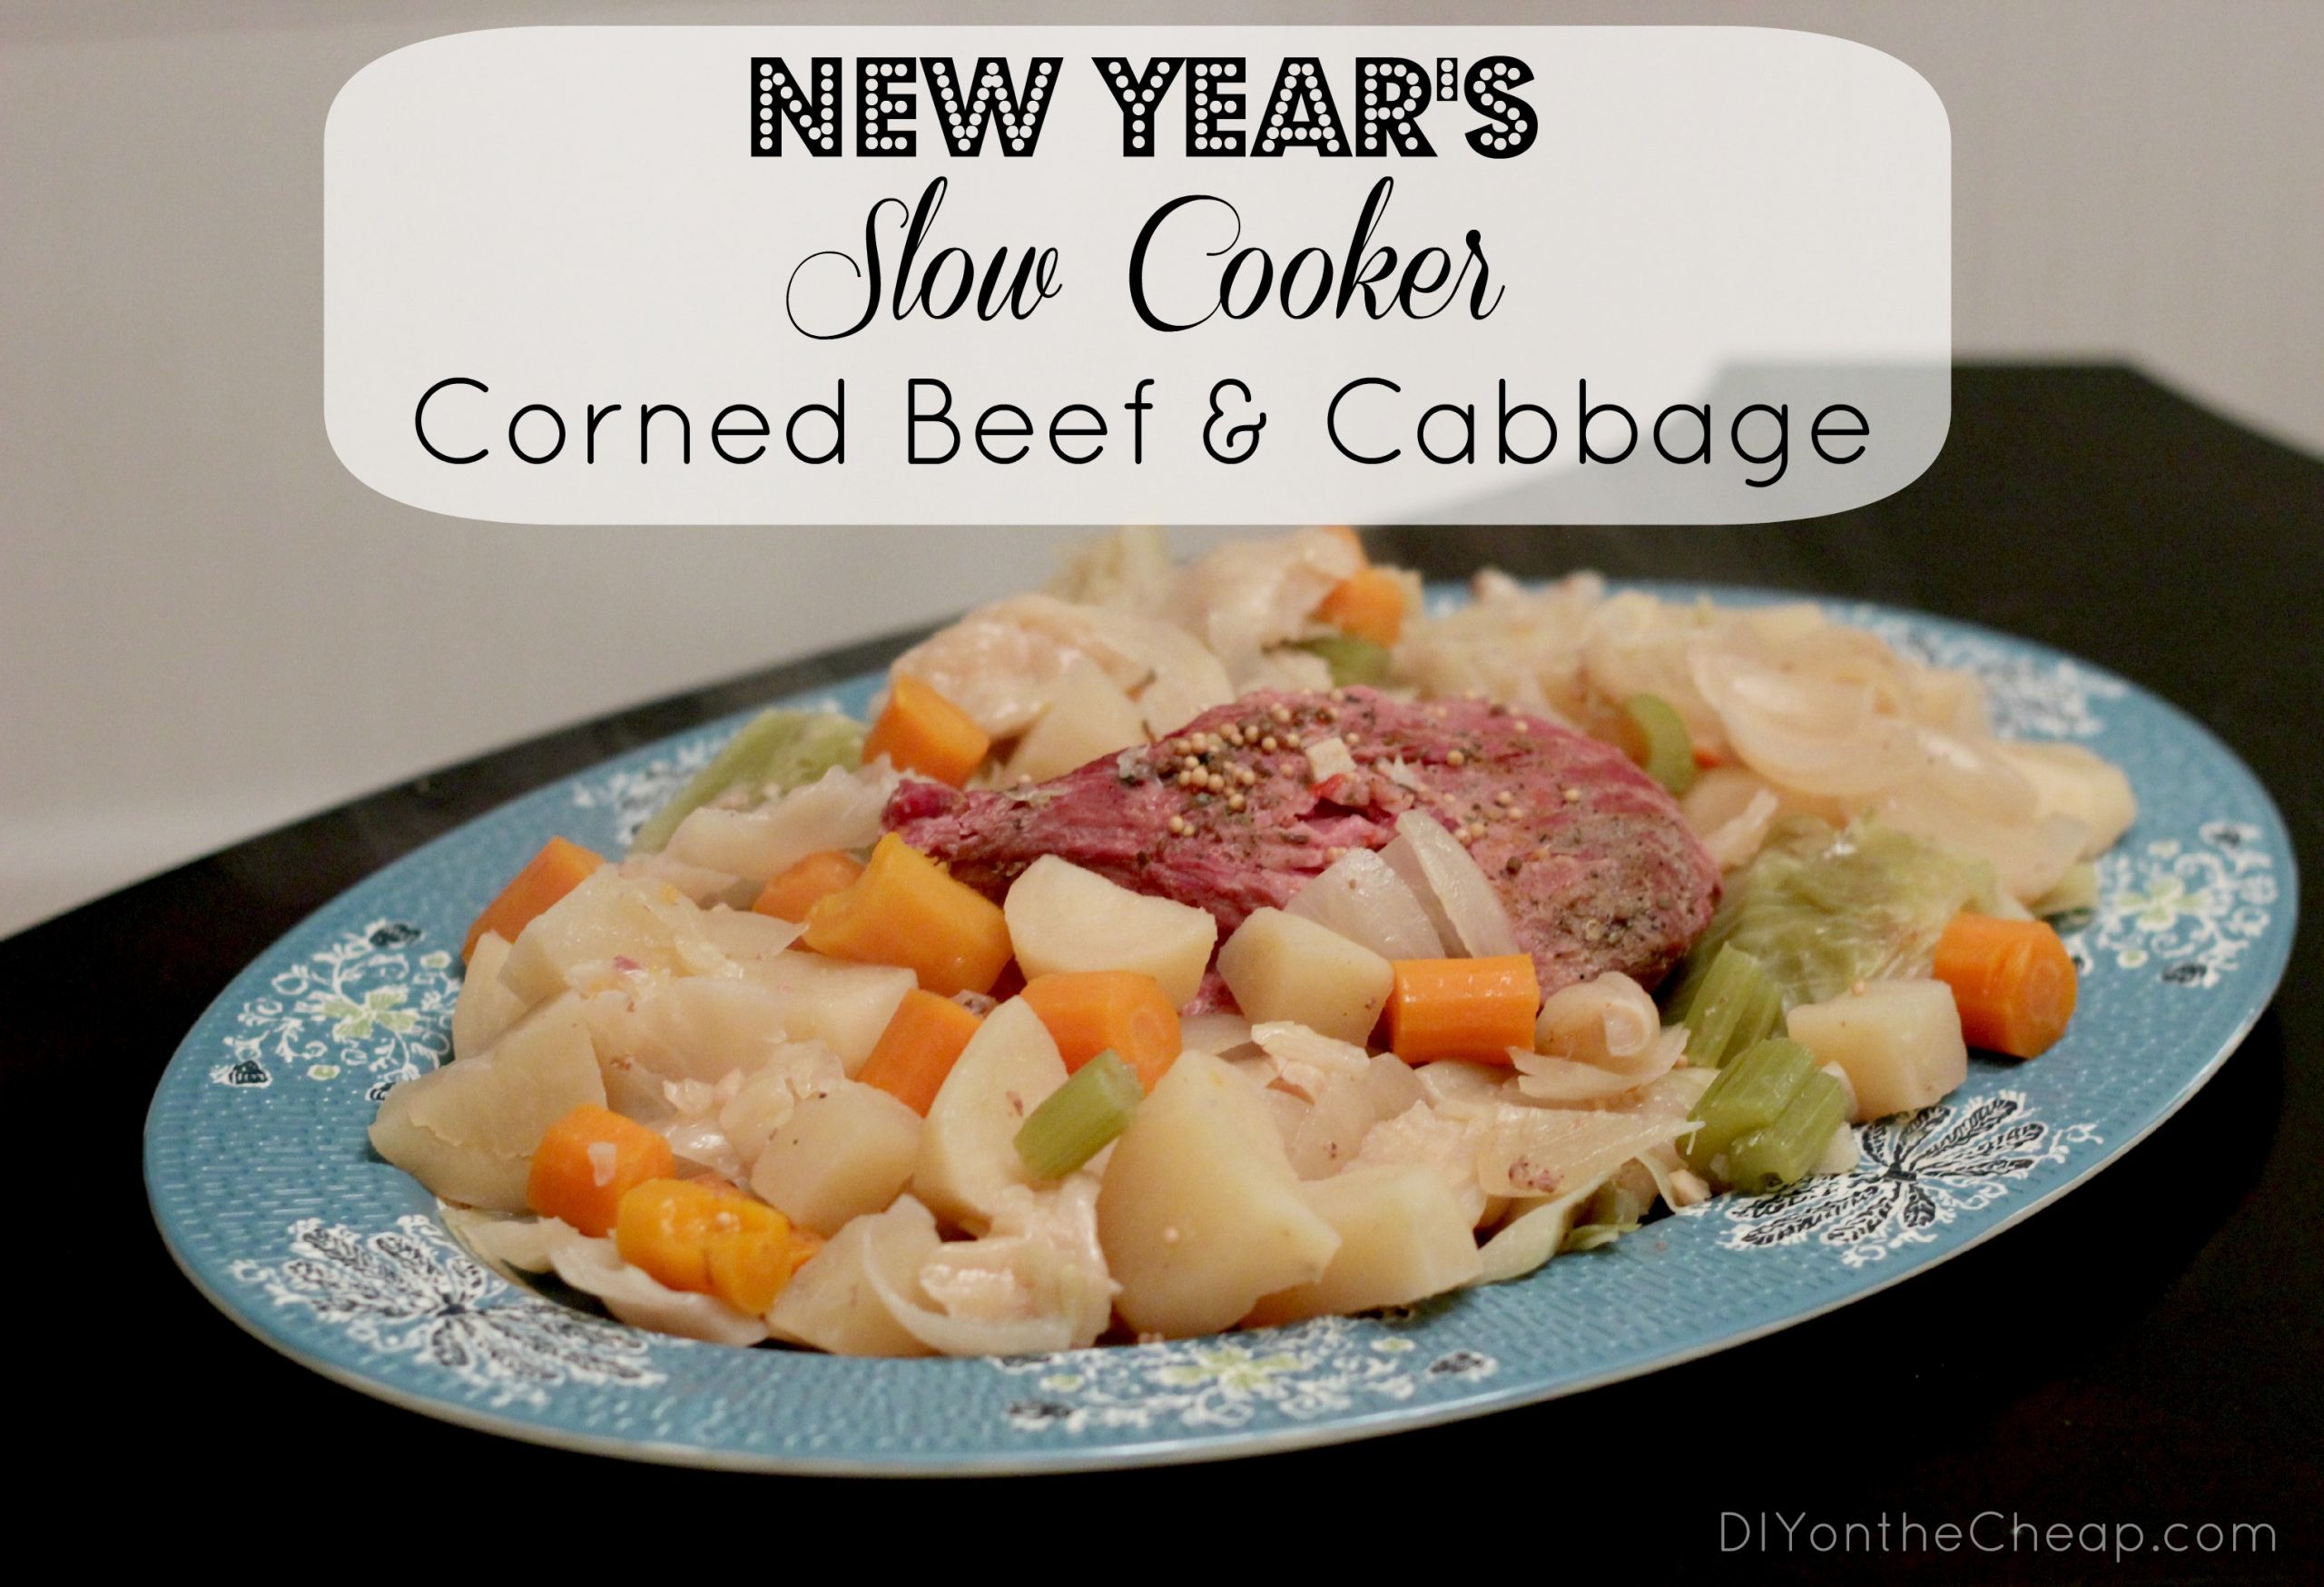 Cabbage New Years
 New Years Slow Cooker Corned Beef & Cabbage Free